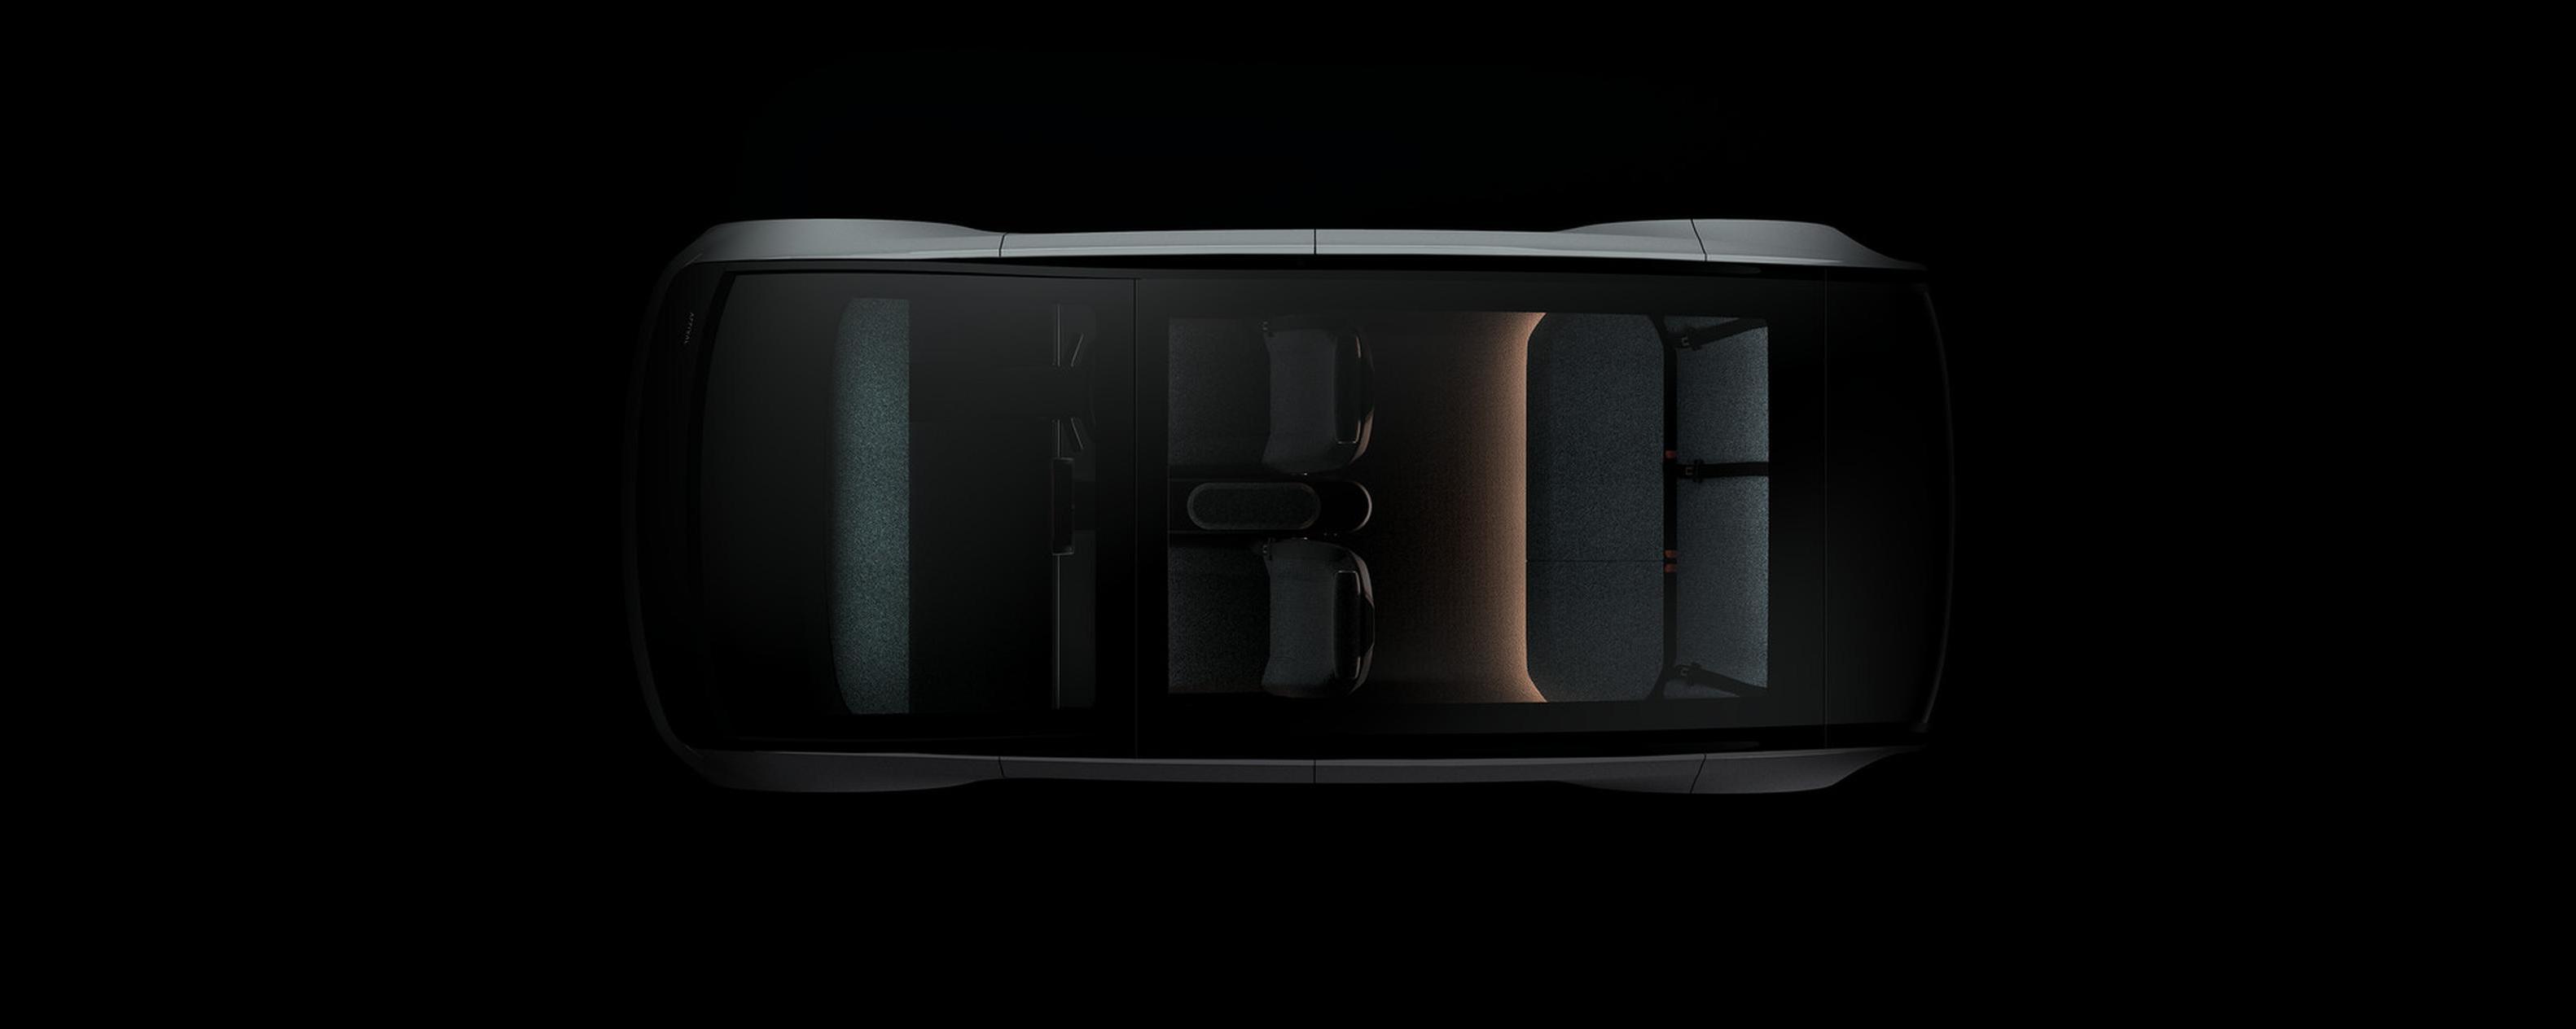 The Arrival Car will feature a panoramic roof, offer ample space for passengers and their luggage while also being more comfortable for drivers (Arrival)